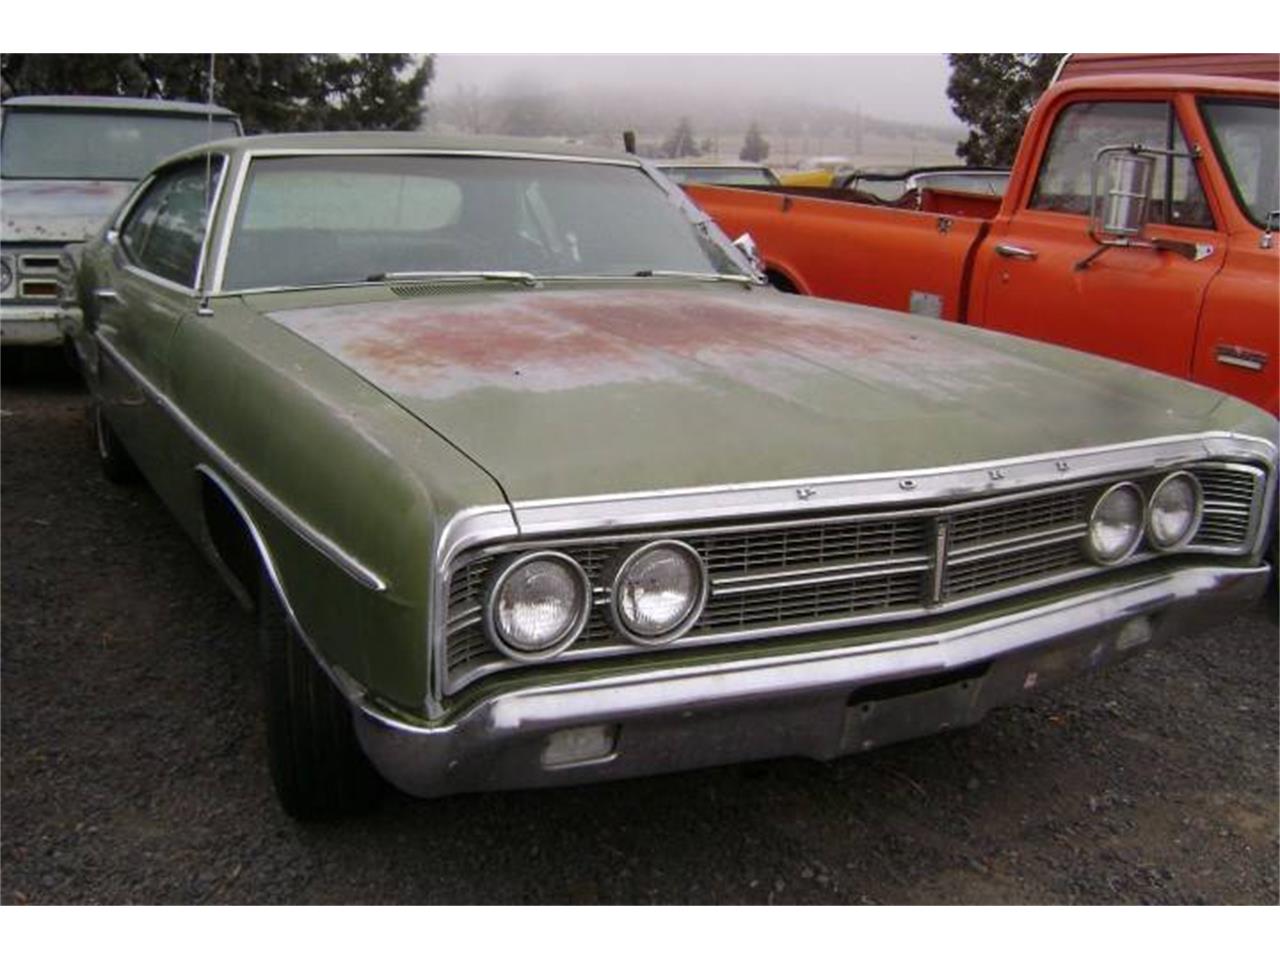 1970 Ford Galaxie 500 For Sale Classiccars Com Cc 1072207